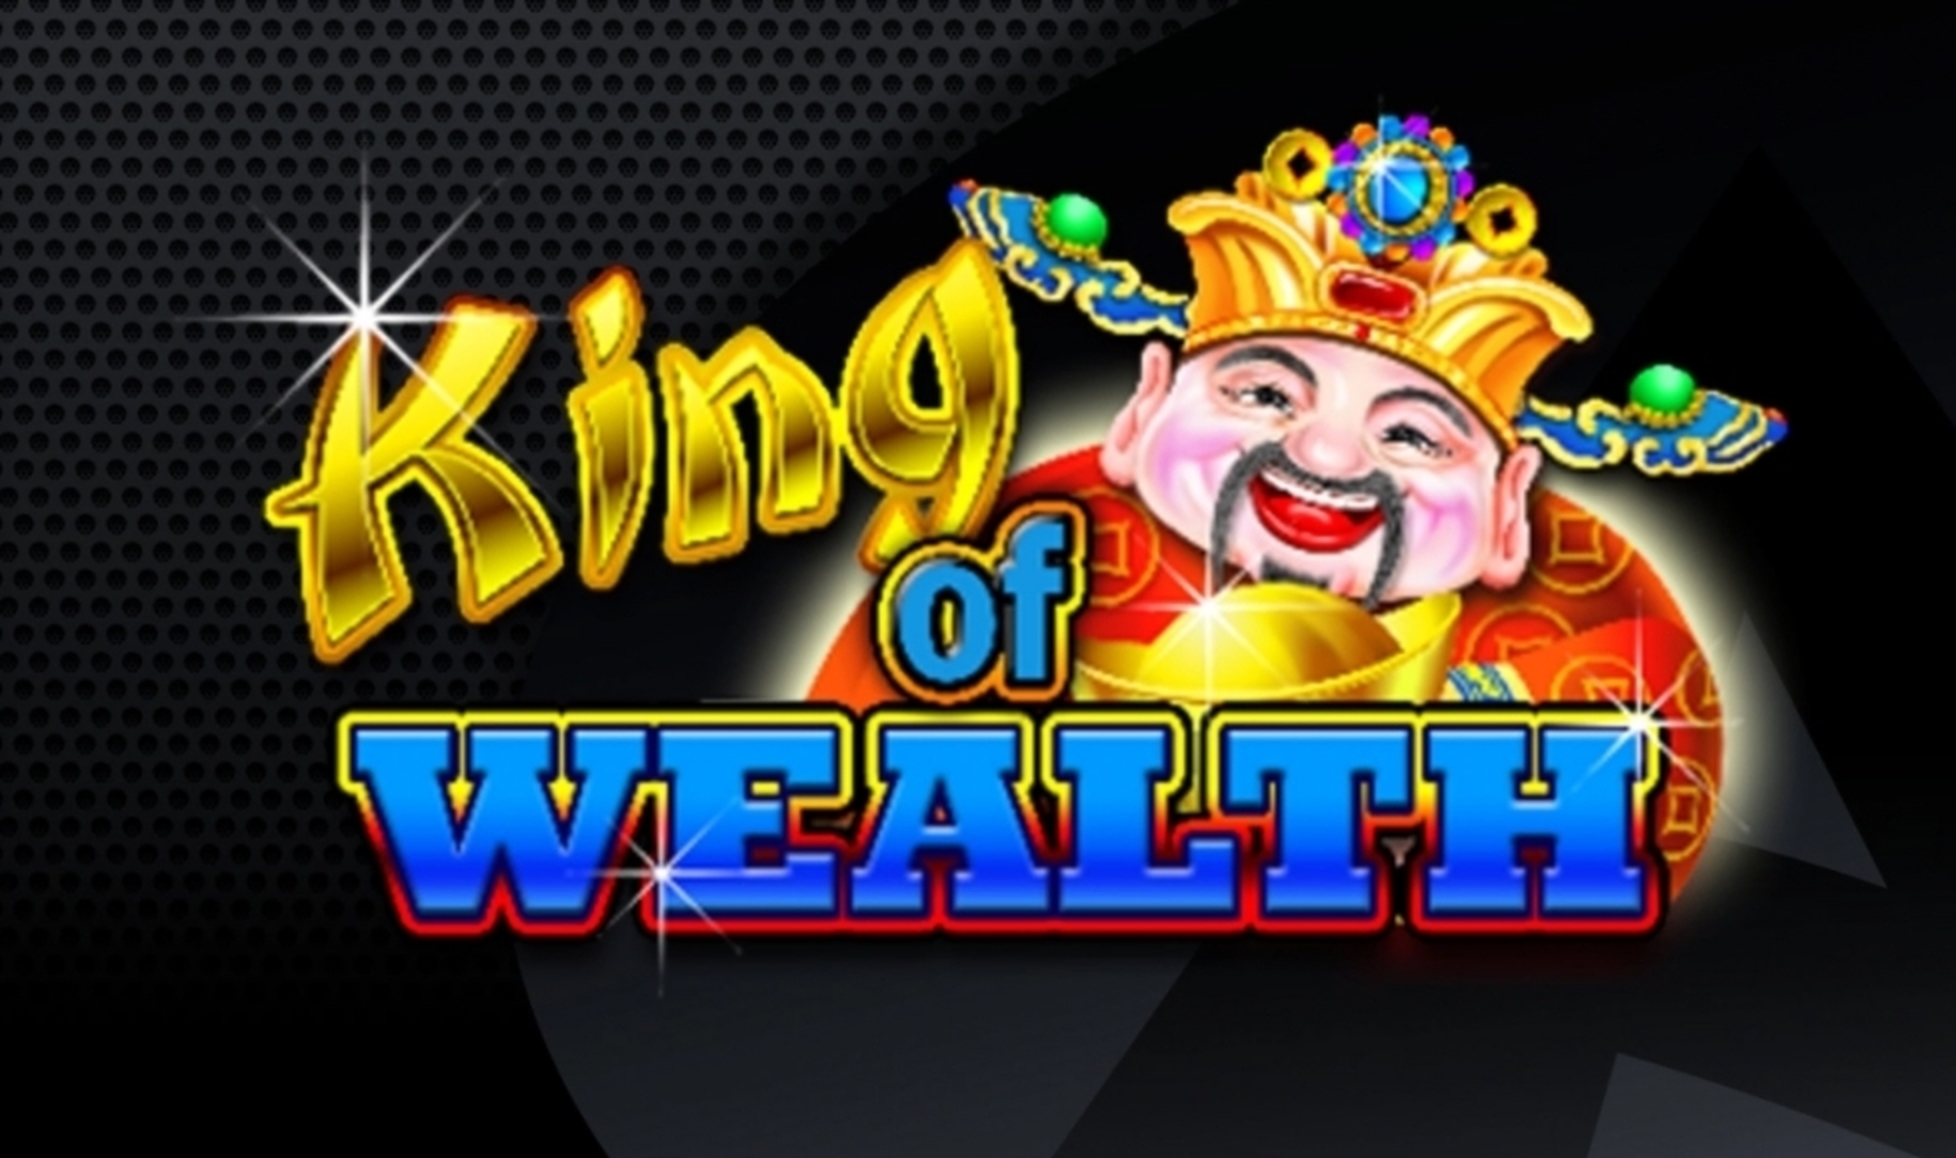 King of Wealth Double Hit